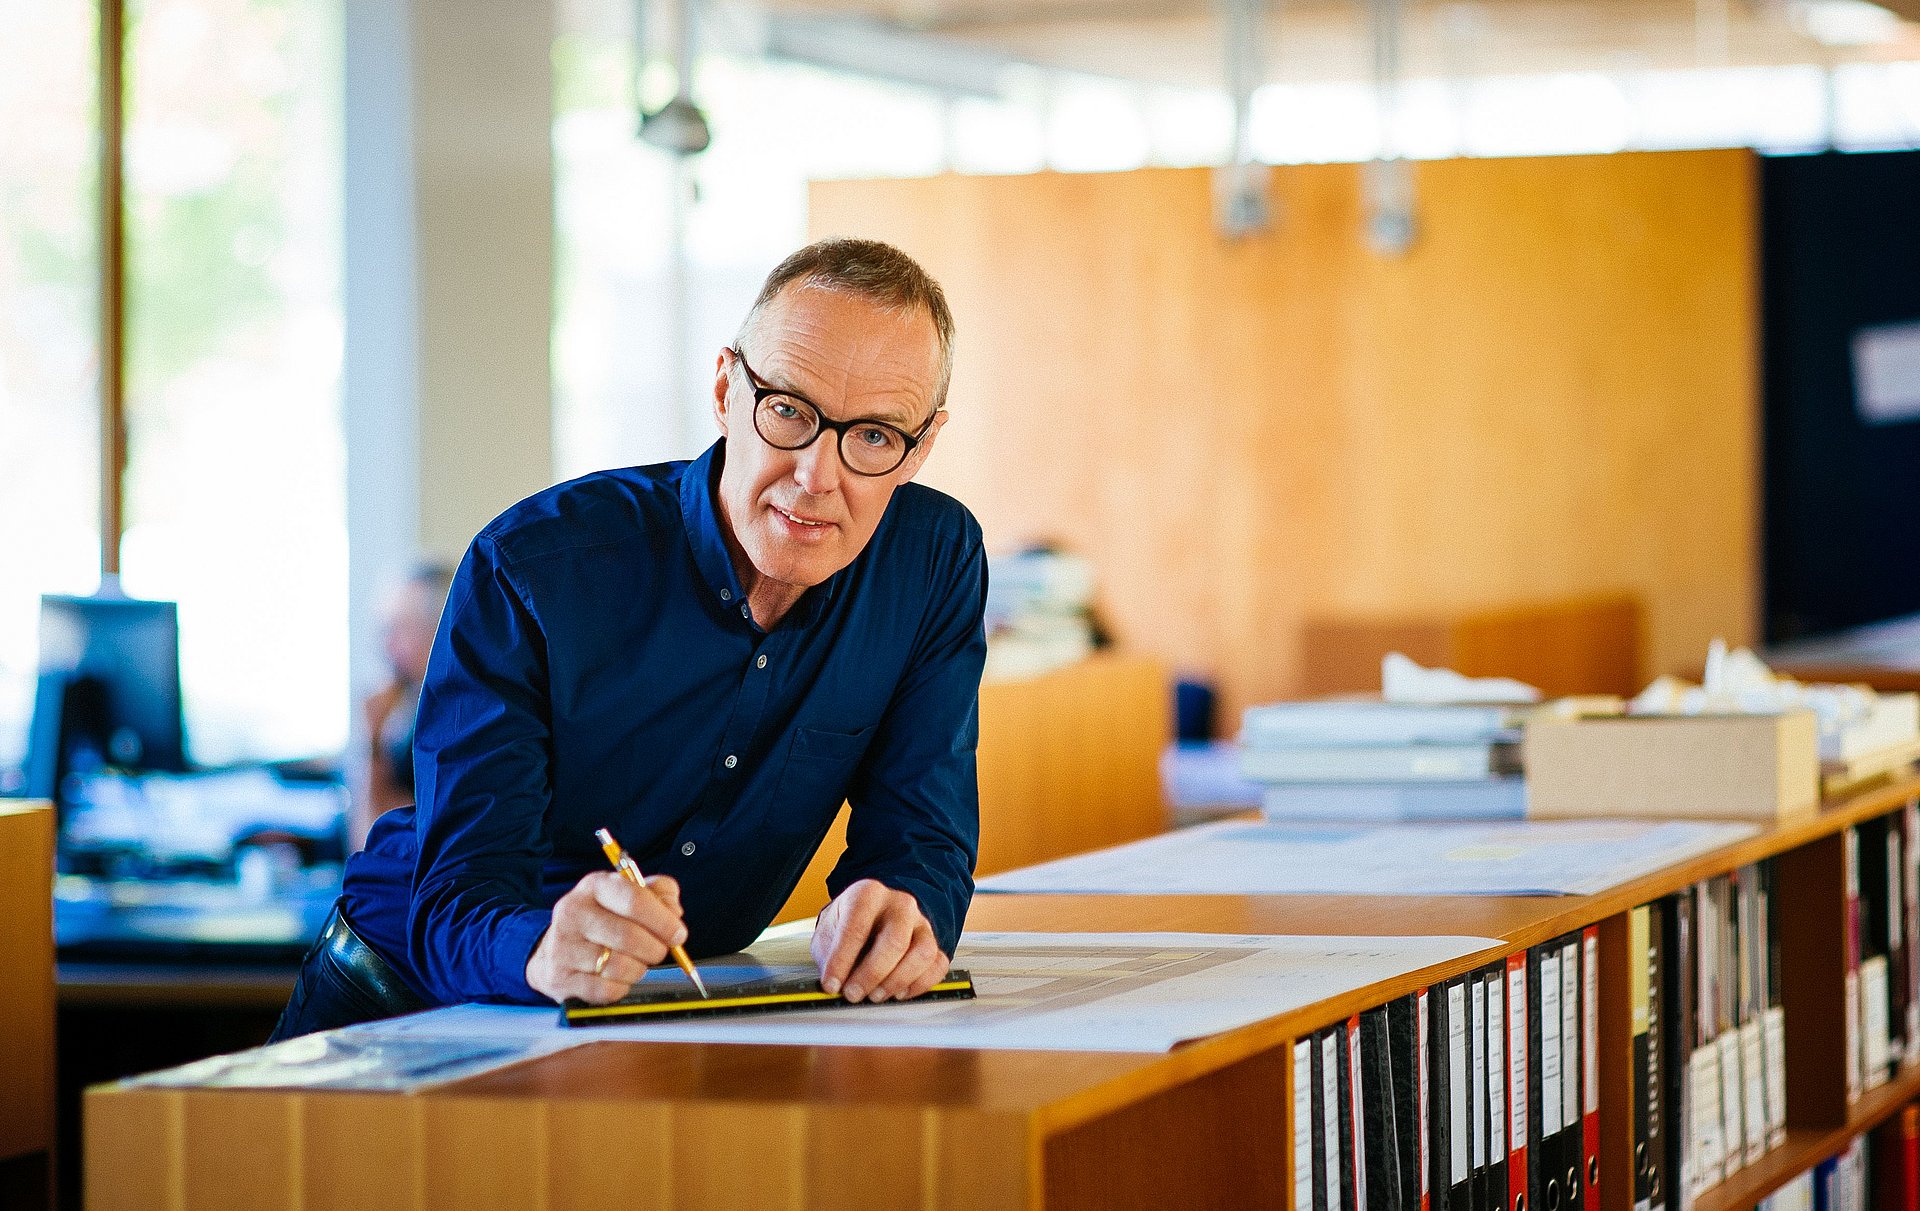 Since 2002, Hermann Kaufmann is professor for Architectural Design and Timber Construction at TUM. (Image: Martin Polt)